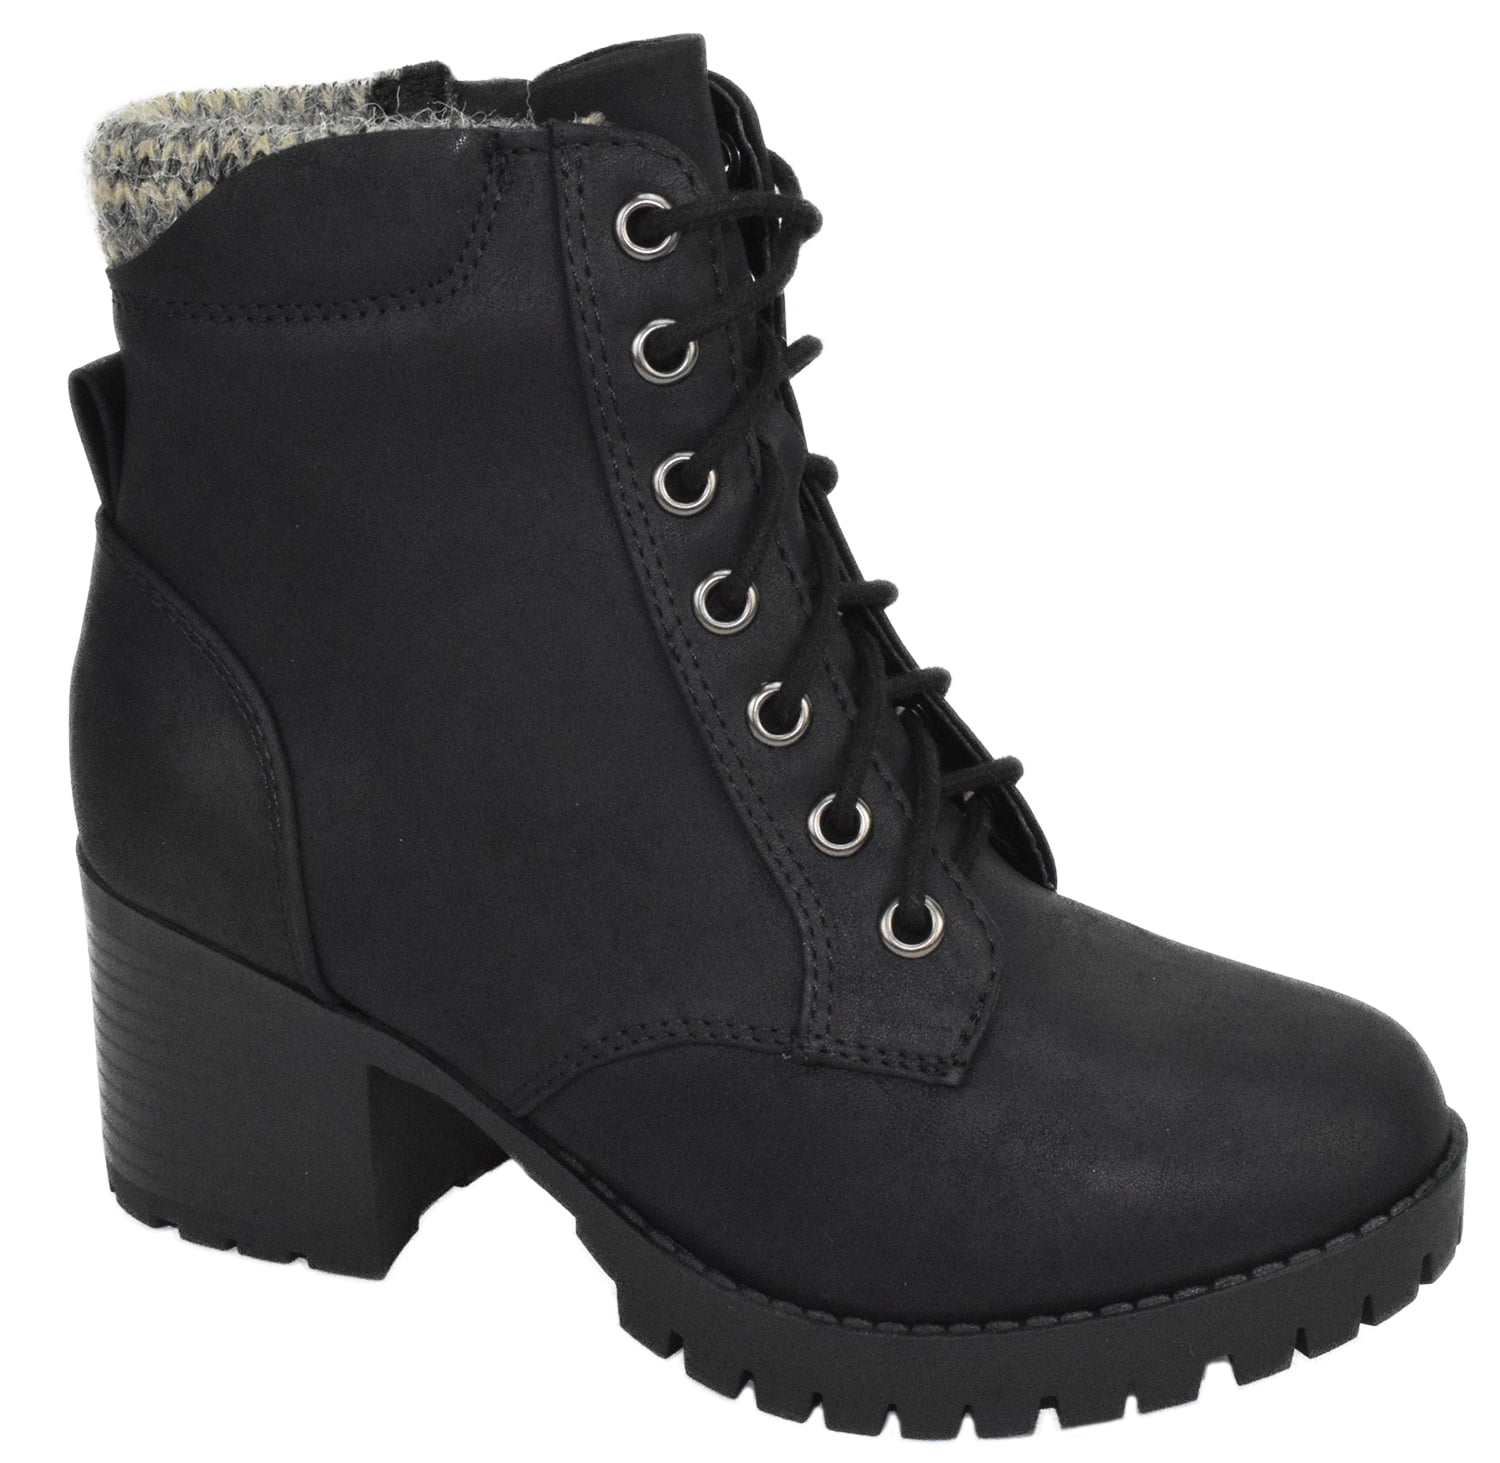 Soda Women Chunky High Heel Combat Army Military Riding Boots Booties ...